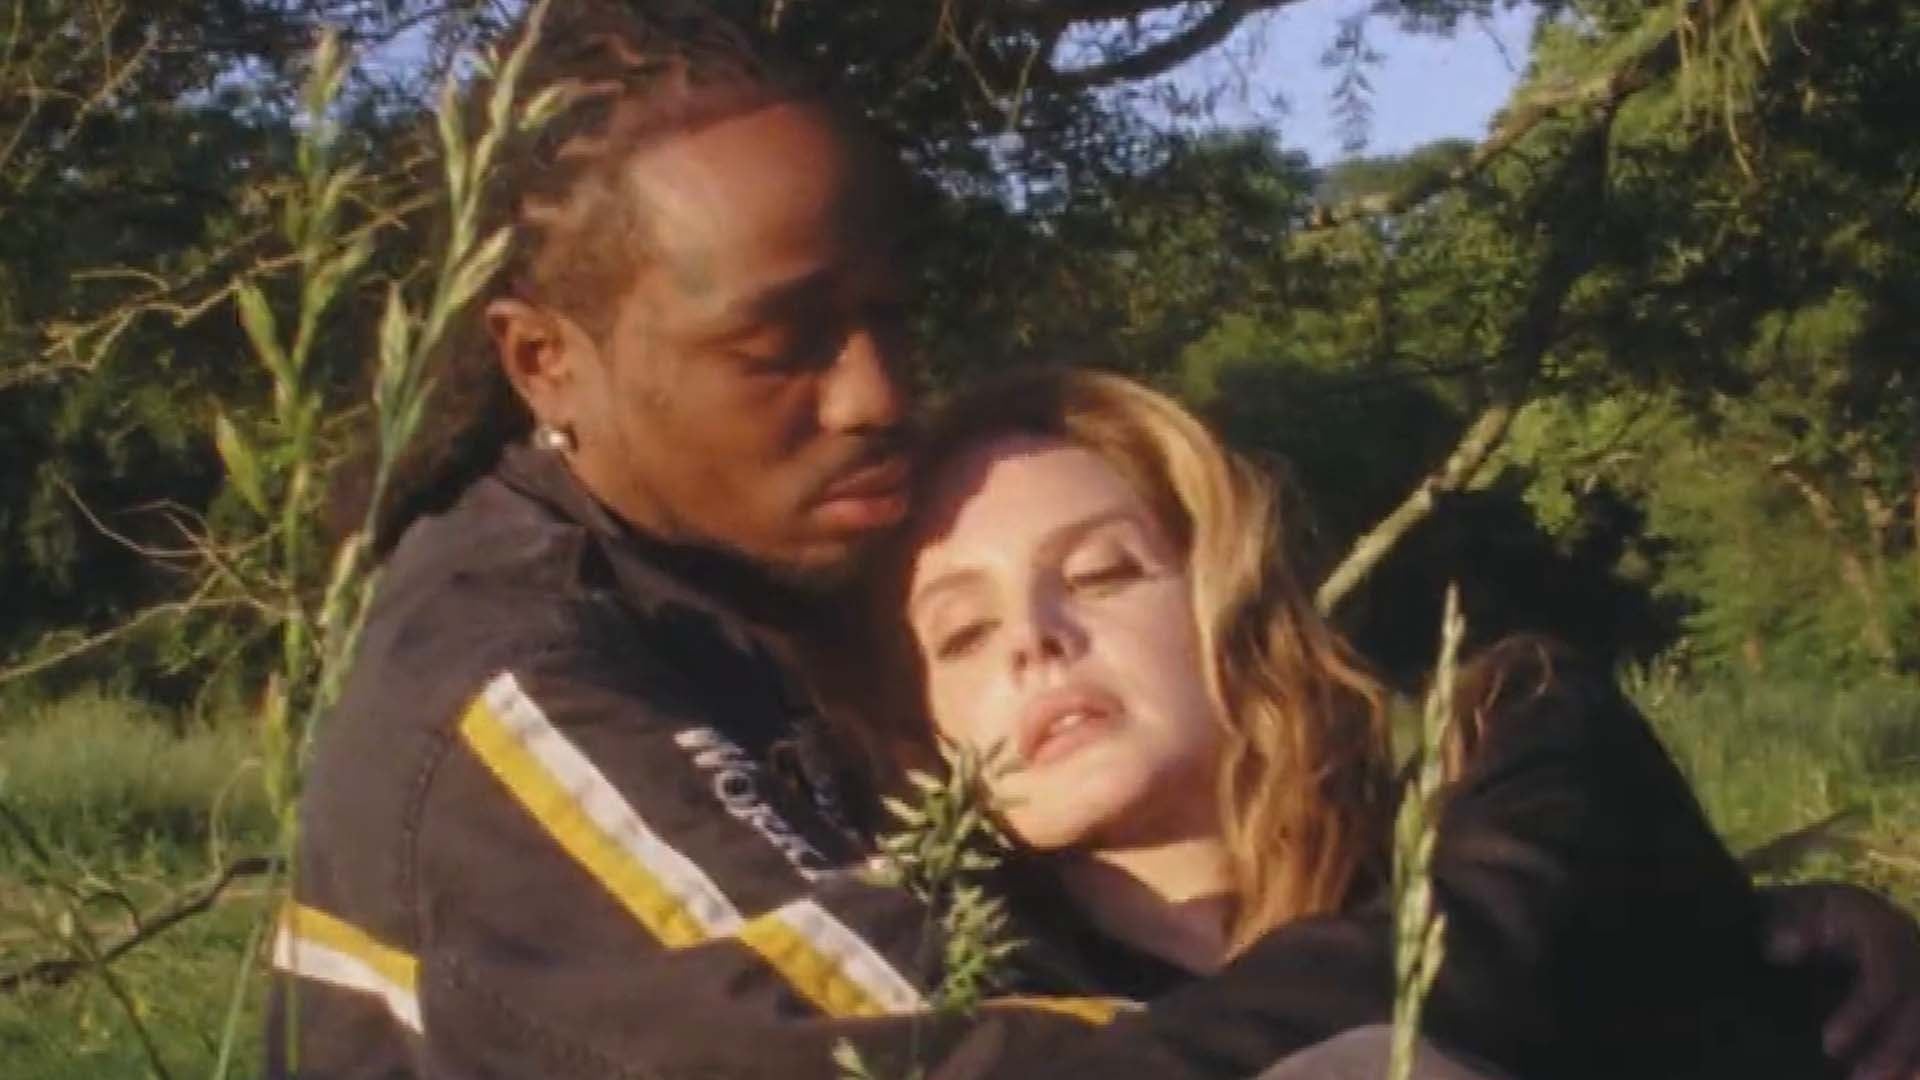 Lana Del Rey and Quavo Romance Each Other in 'Tough' Music Video